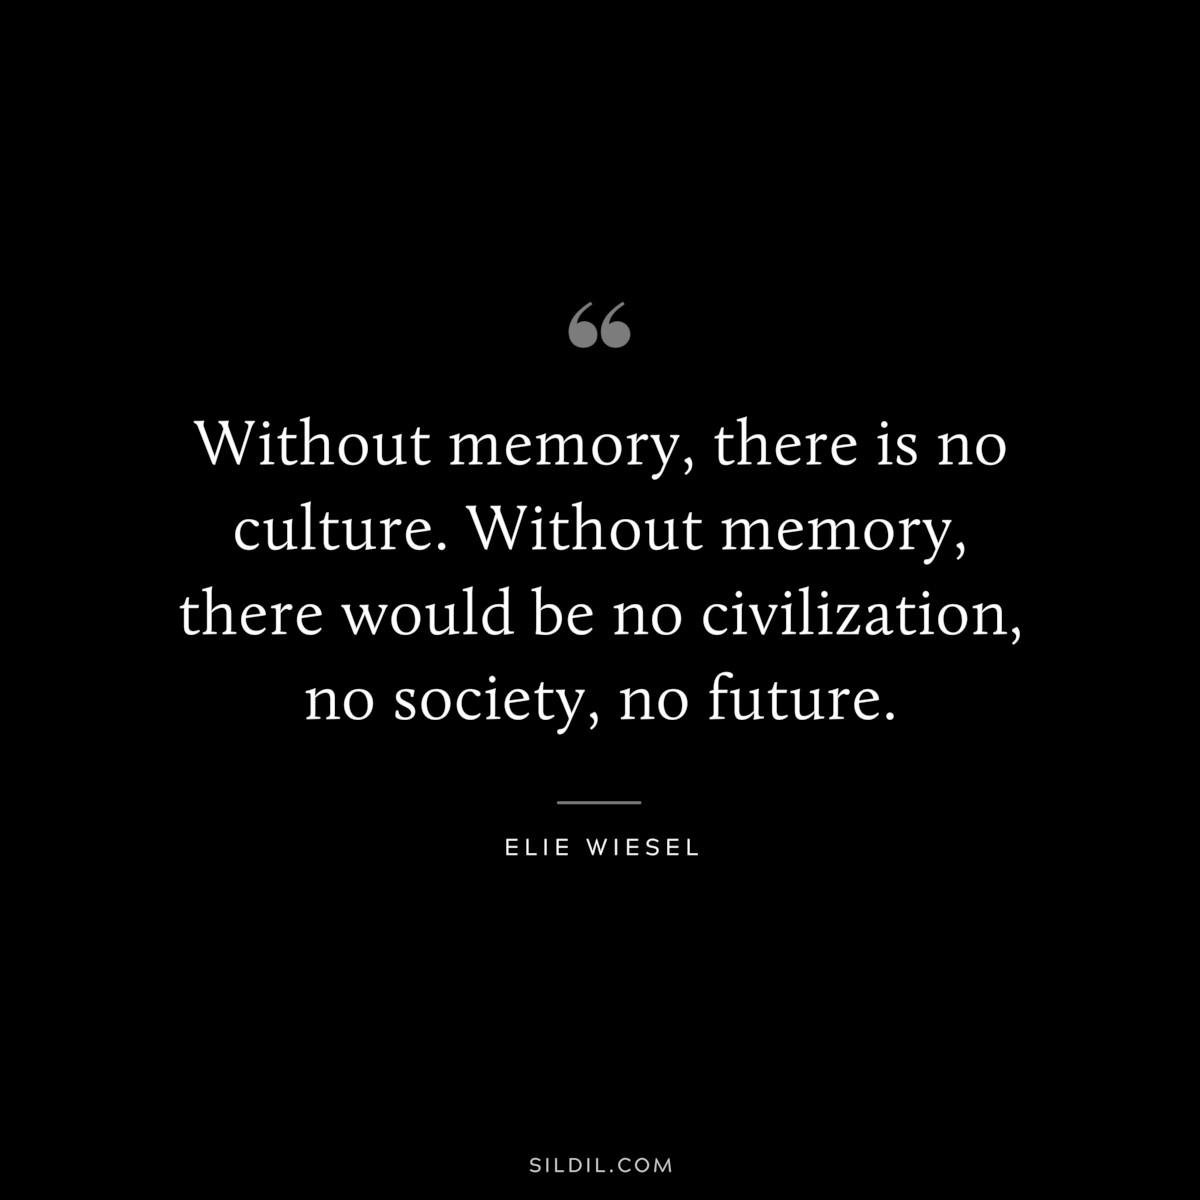 Without memory, there is no culture. Without memory, there would be no civilization, no society, no future. ― Elie Wiesel